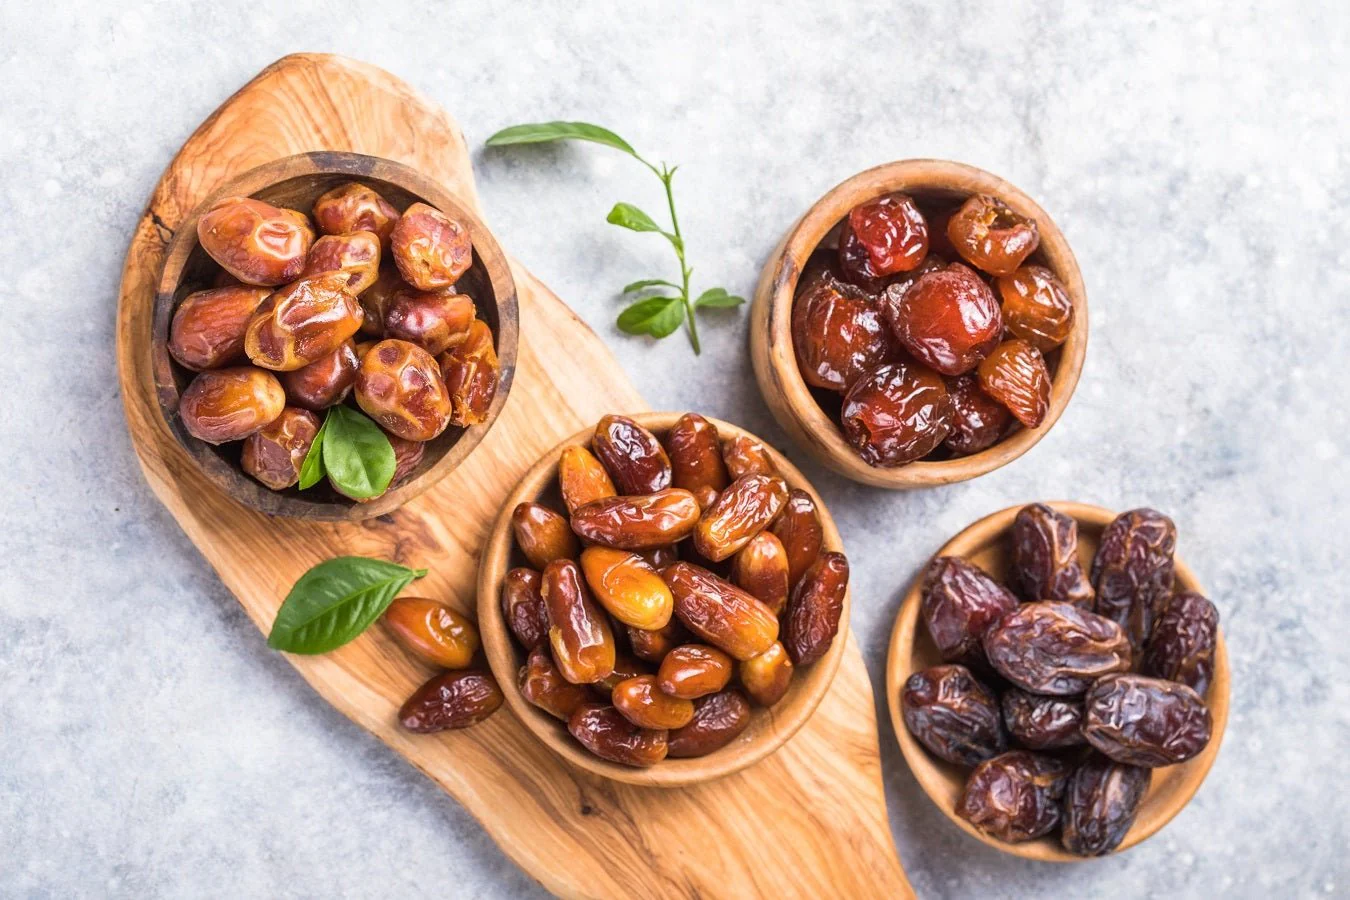 Harga Kurma Malaysia: Your Guide to Finding Affordable Dates